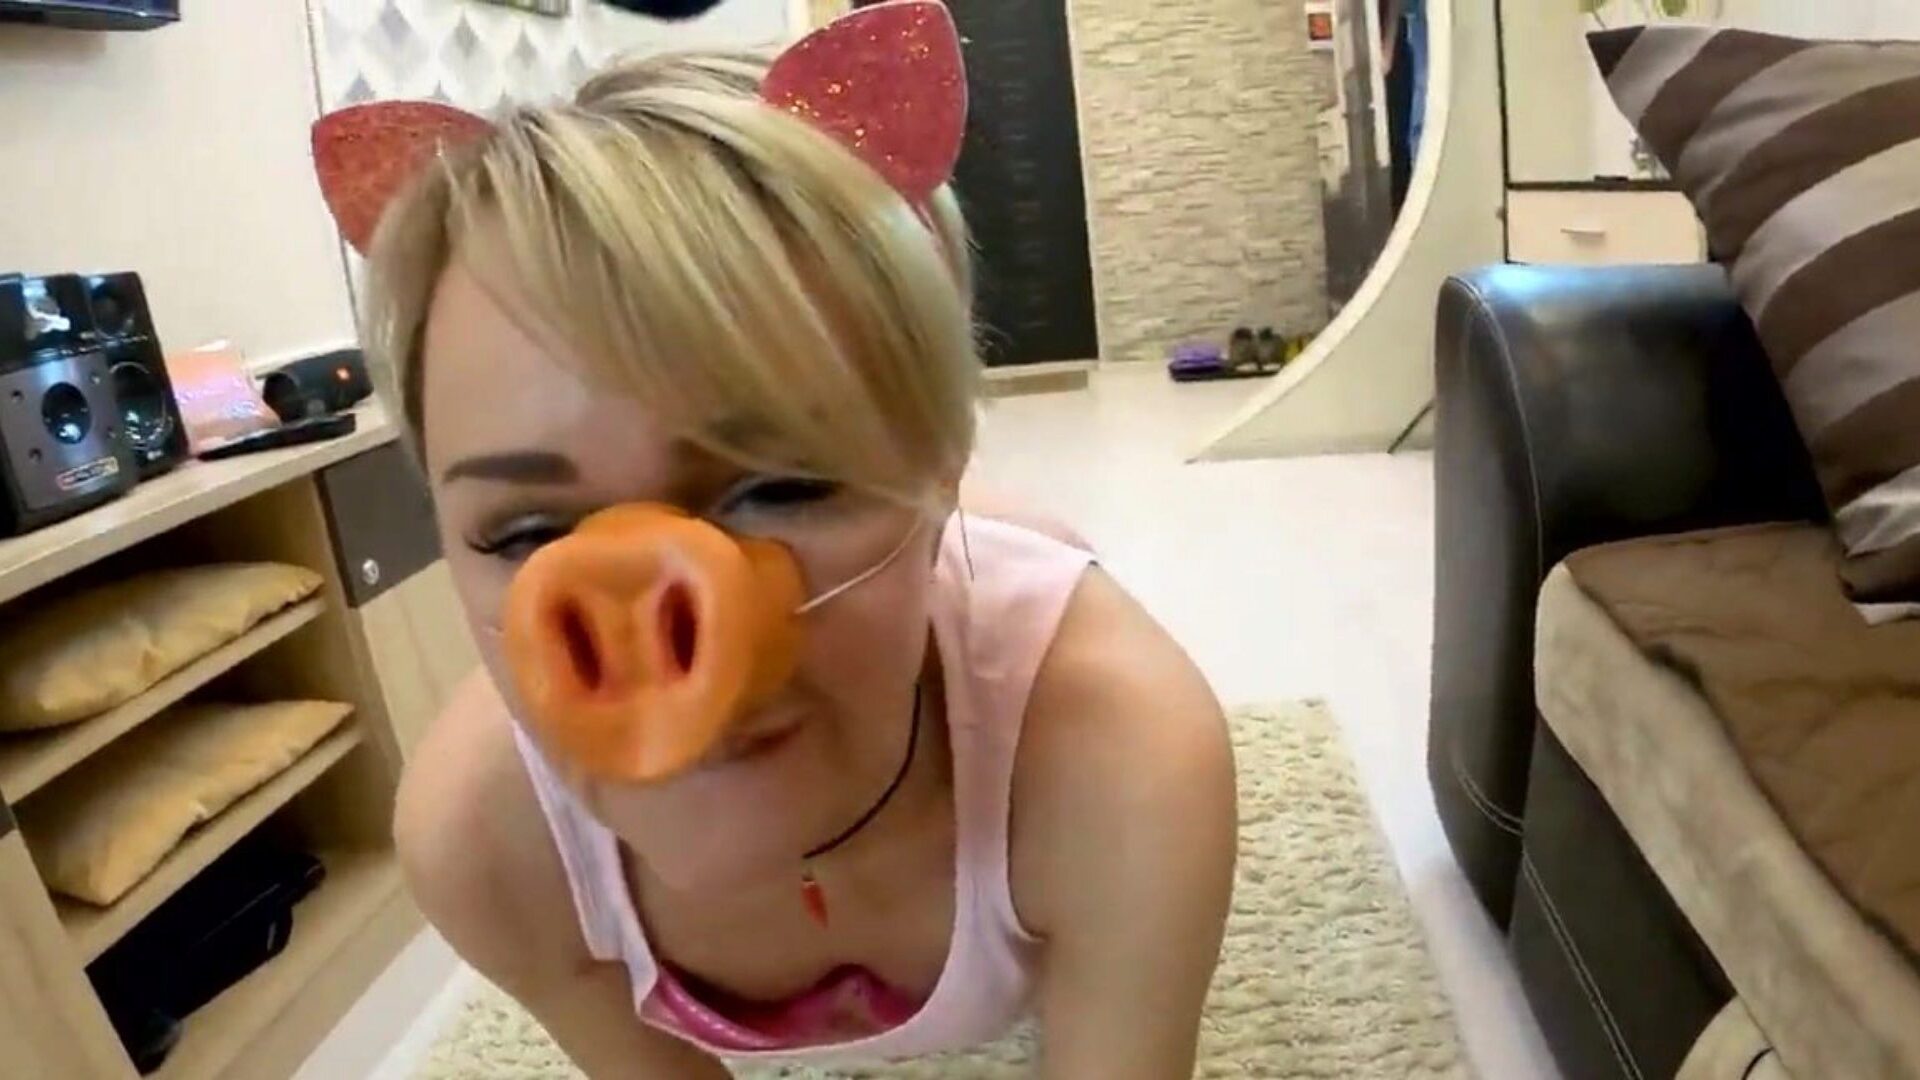 Piggie Deep Sucking Big Dick & Ass Fucking - Facial... Watch Piggie Deep Sucking Big Dick & Ass Fucking - Facial Cumshot video on xHamster - the ultimate bevy of free mother I'd like to fuck & Hardcore HD porno tube clips